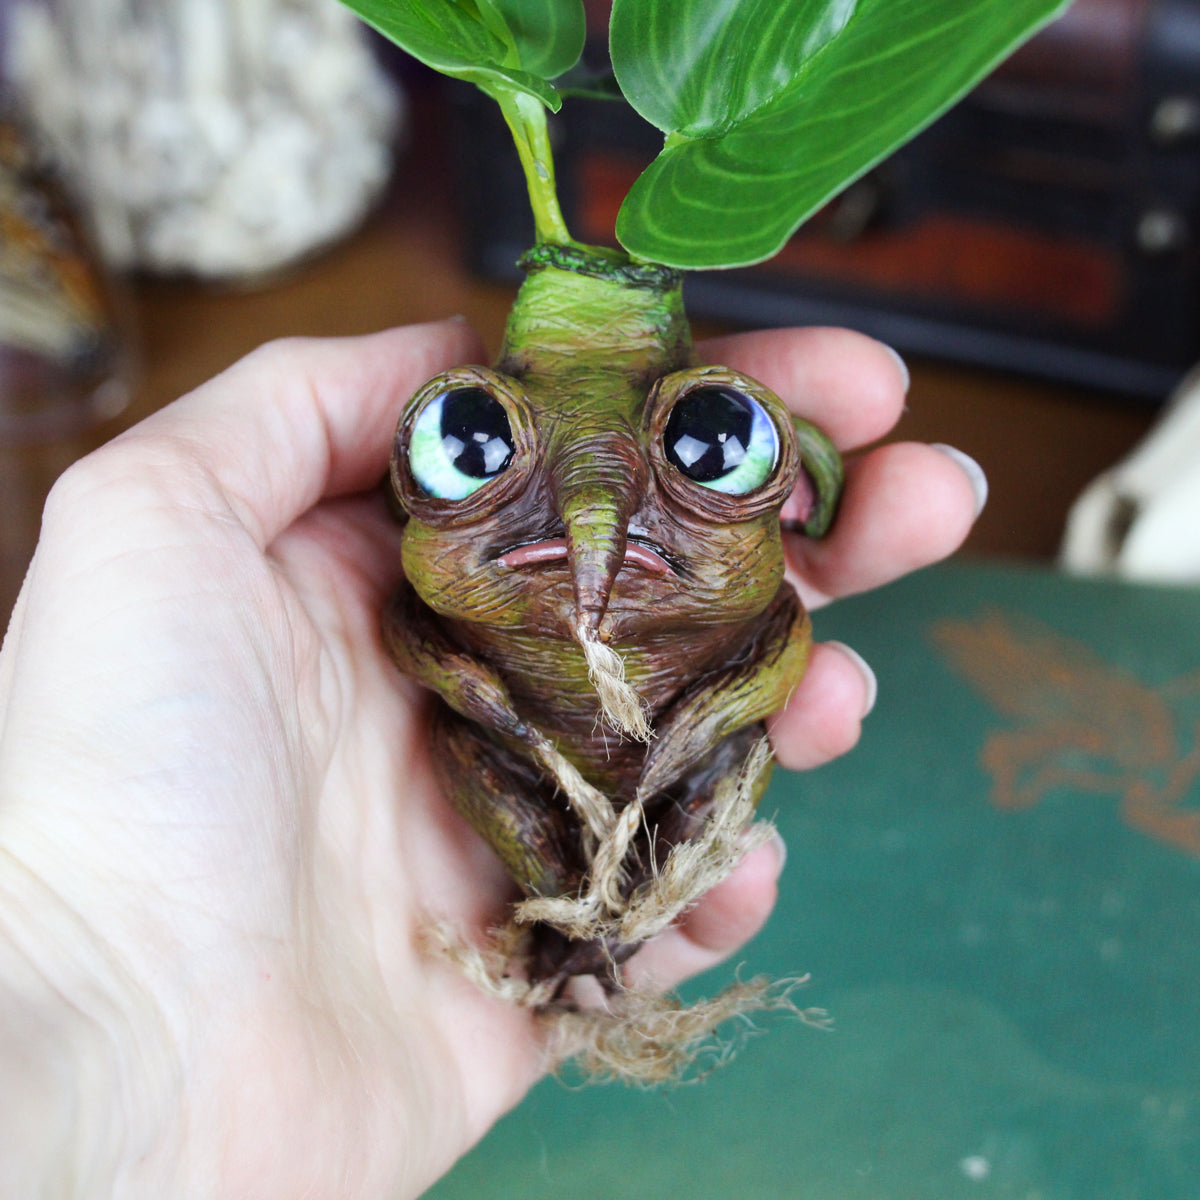 Ooak mandrake roots and other plants in polymer clay -  Portugal